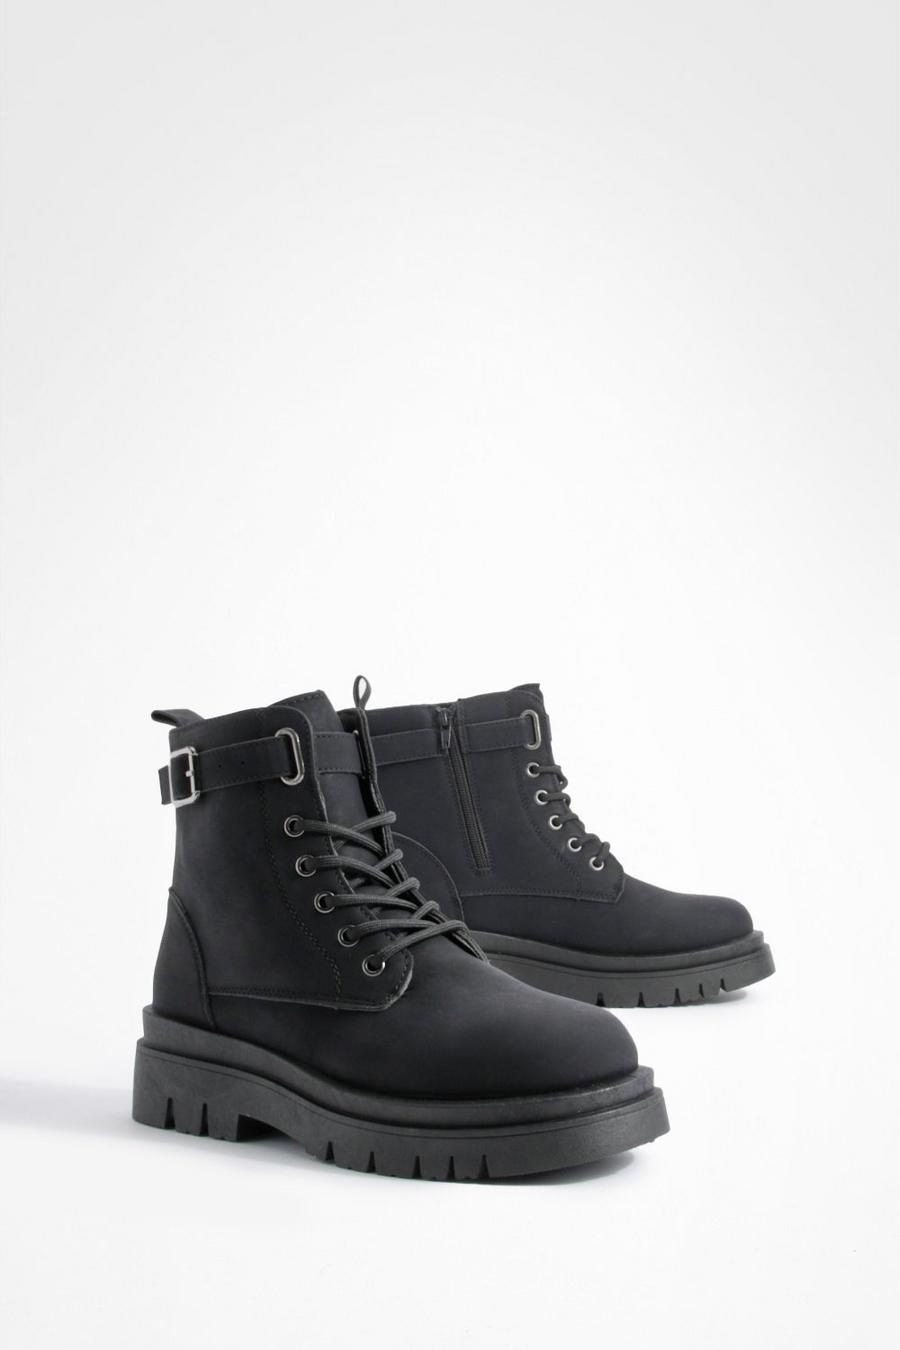 Buckle Detail Lace Up Hiker Boots | Boohoo UK